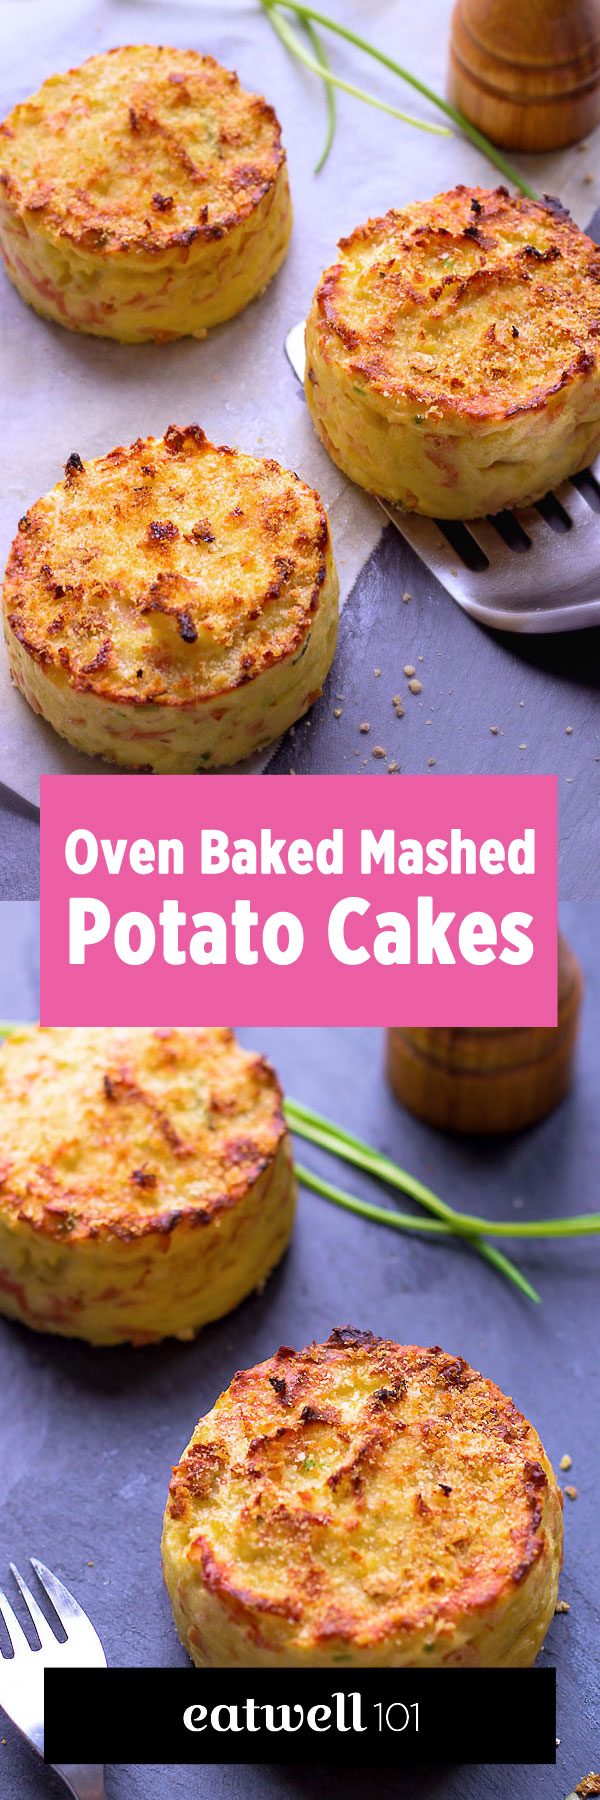 Oven Baked Mashed Potato Cakes - #eatwell101 #recipe #potato #sidedish - The ideal side to accompany holiday dishes: grilled meat, fish, poultry. 